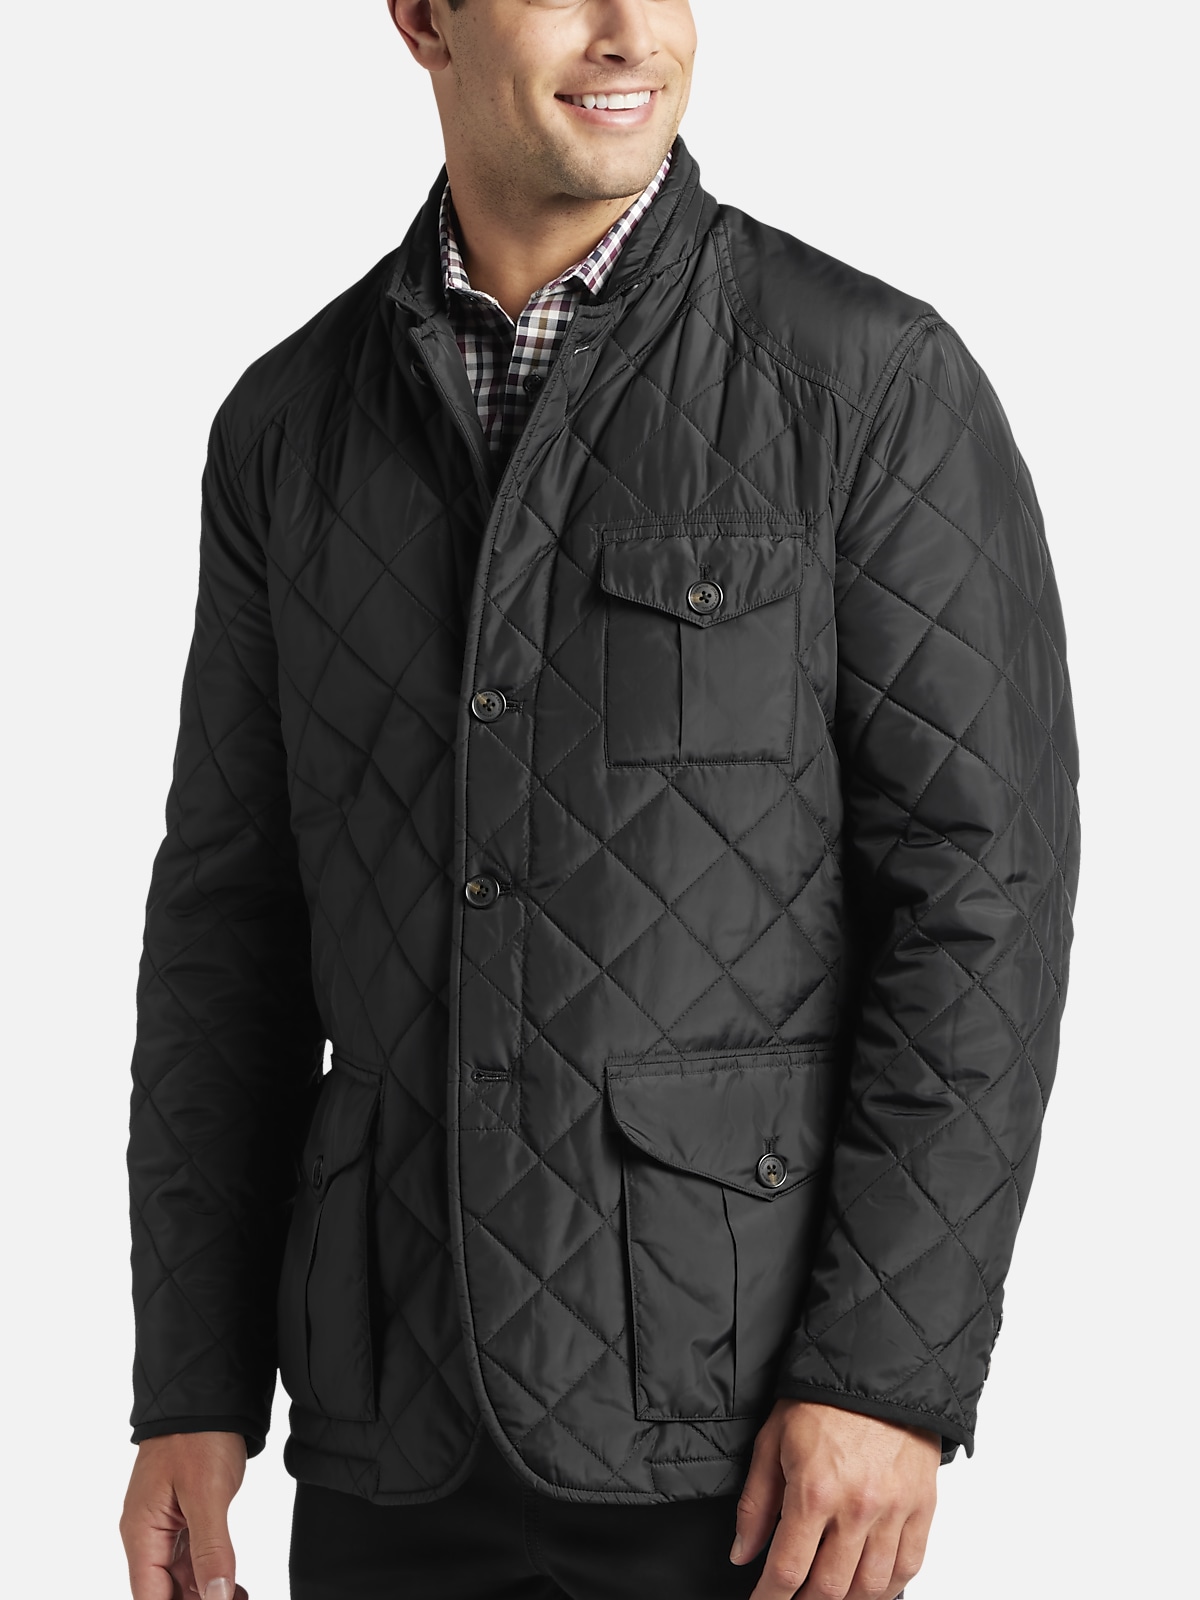 Joseph Abboud Modern Fit Quilted Hunting Jacket | All Sale| Men's Wearhouse